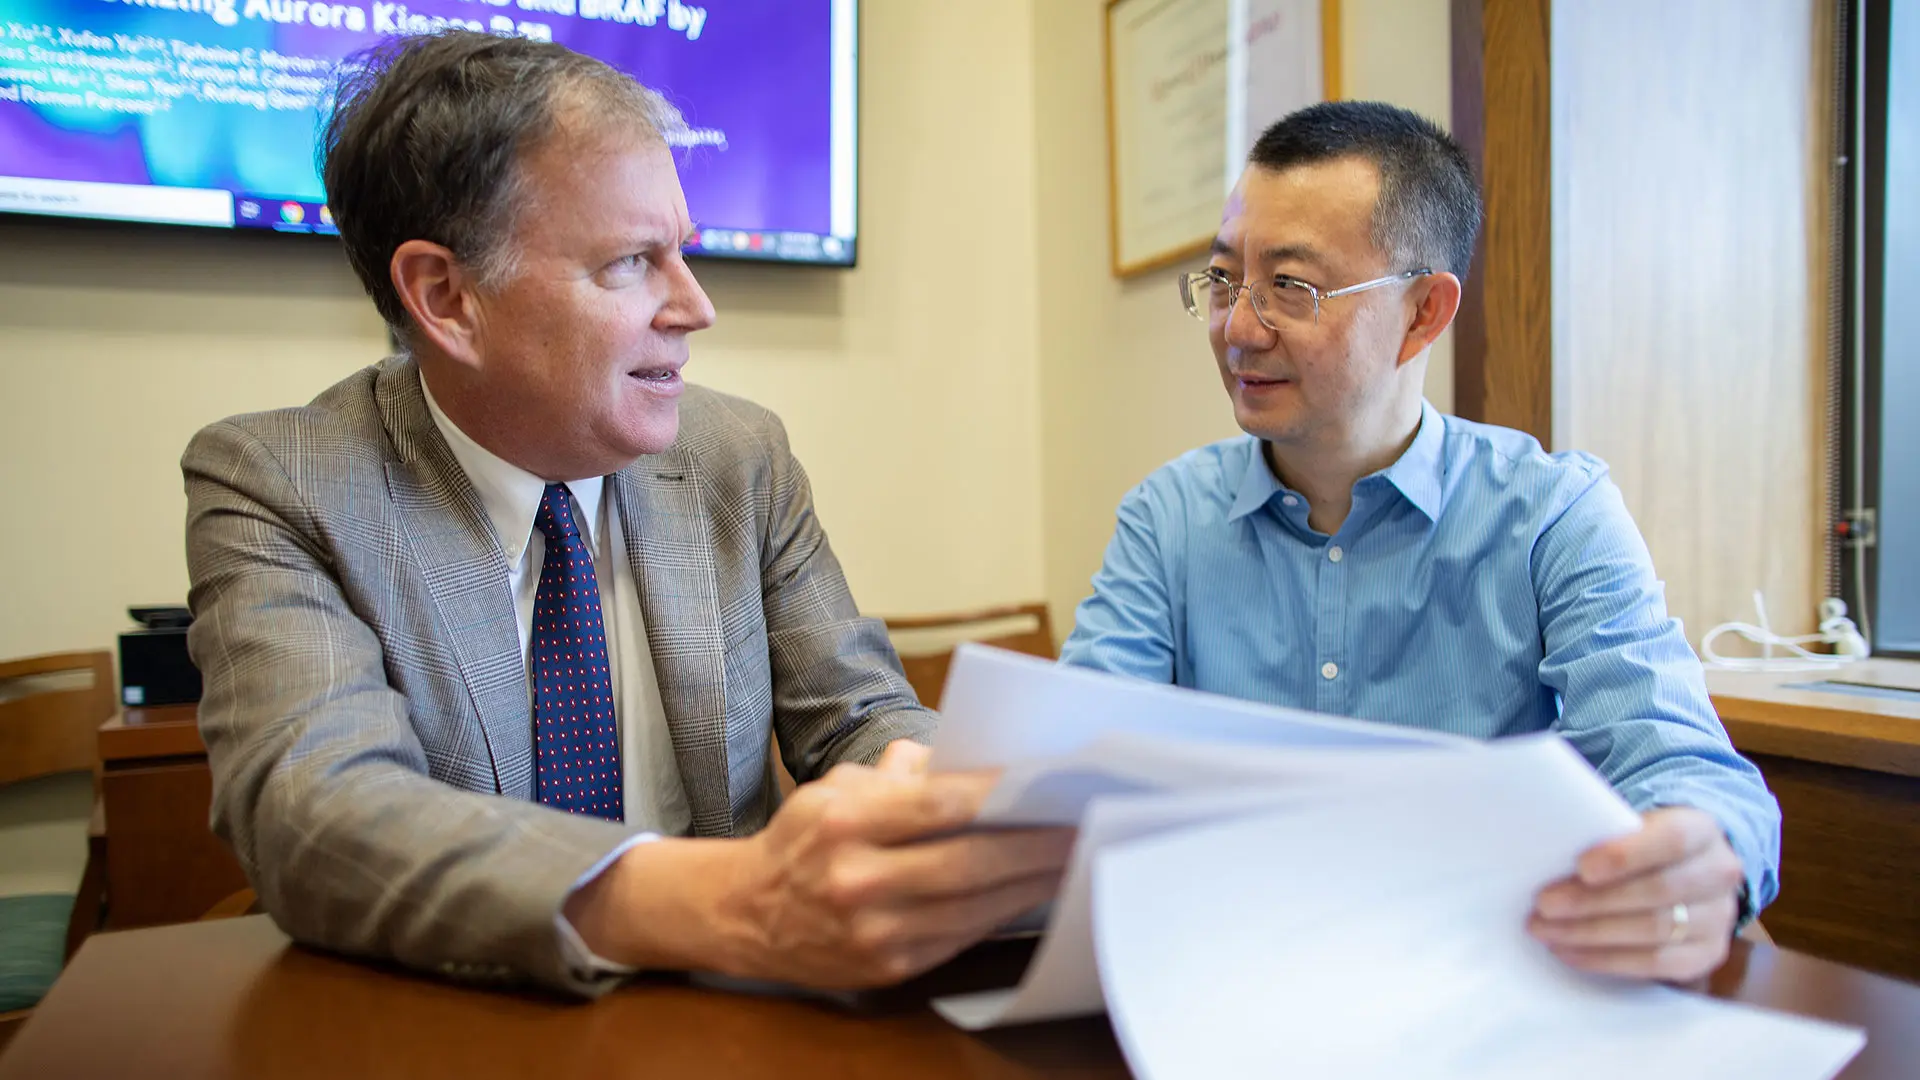 Ramon Parsons, MD, PhD, Director of The Tisch Cancer Institute, left, and Jian Jin, PhD, Mount Sinai Professor in Therapeutics Discovery